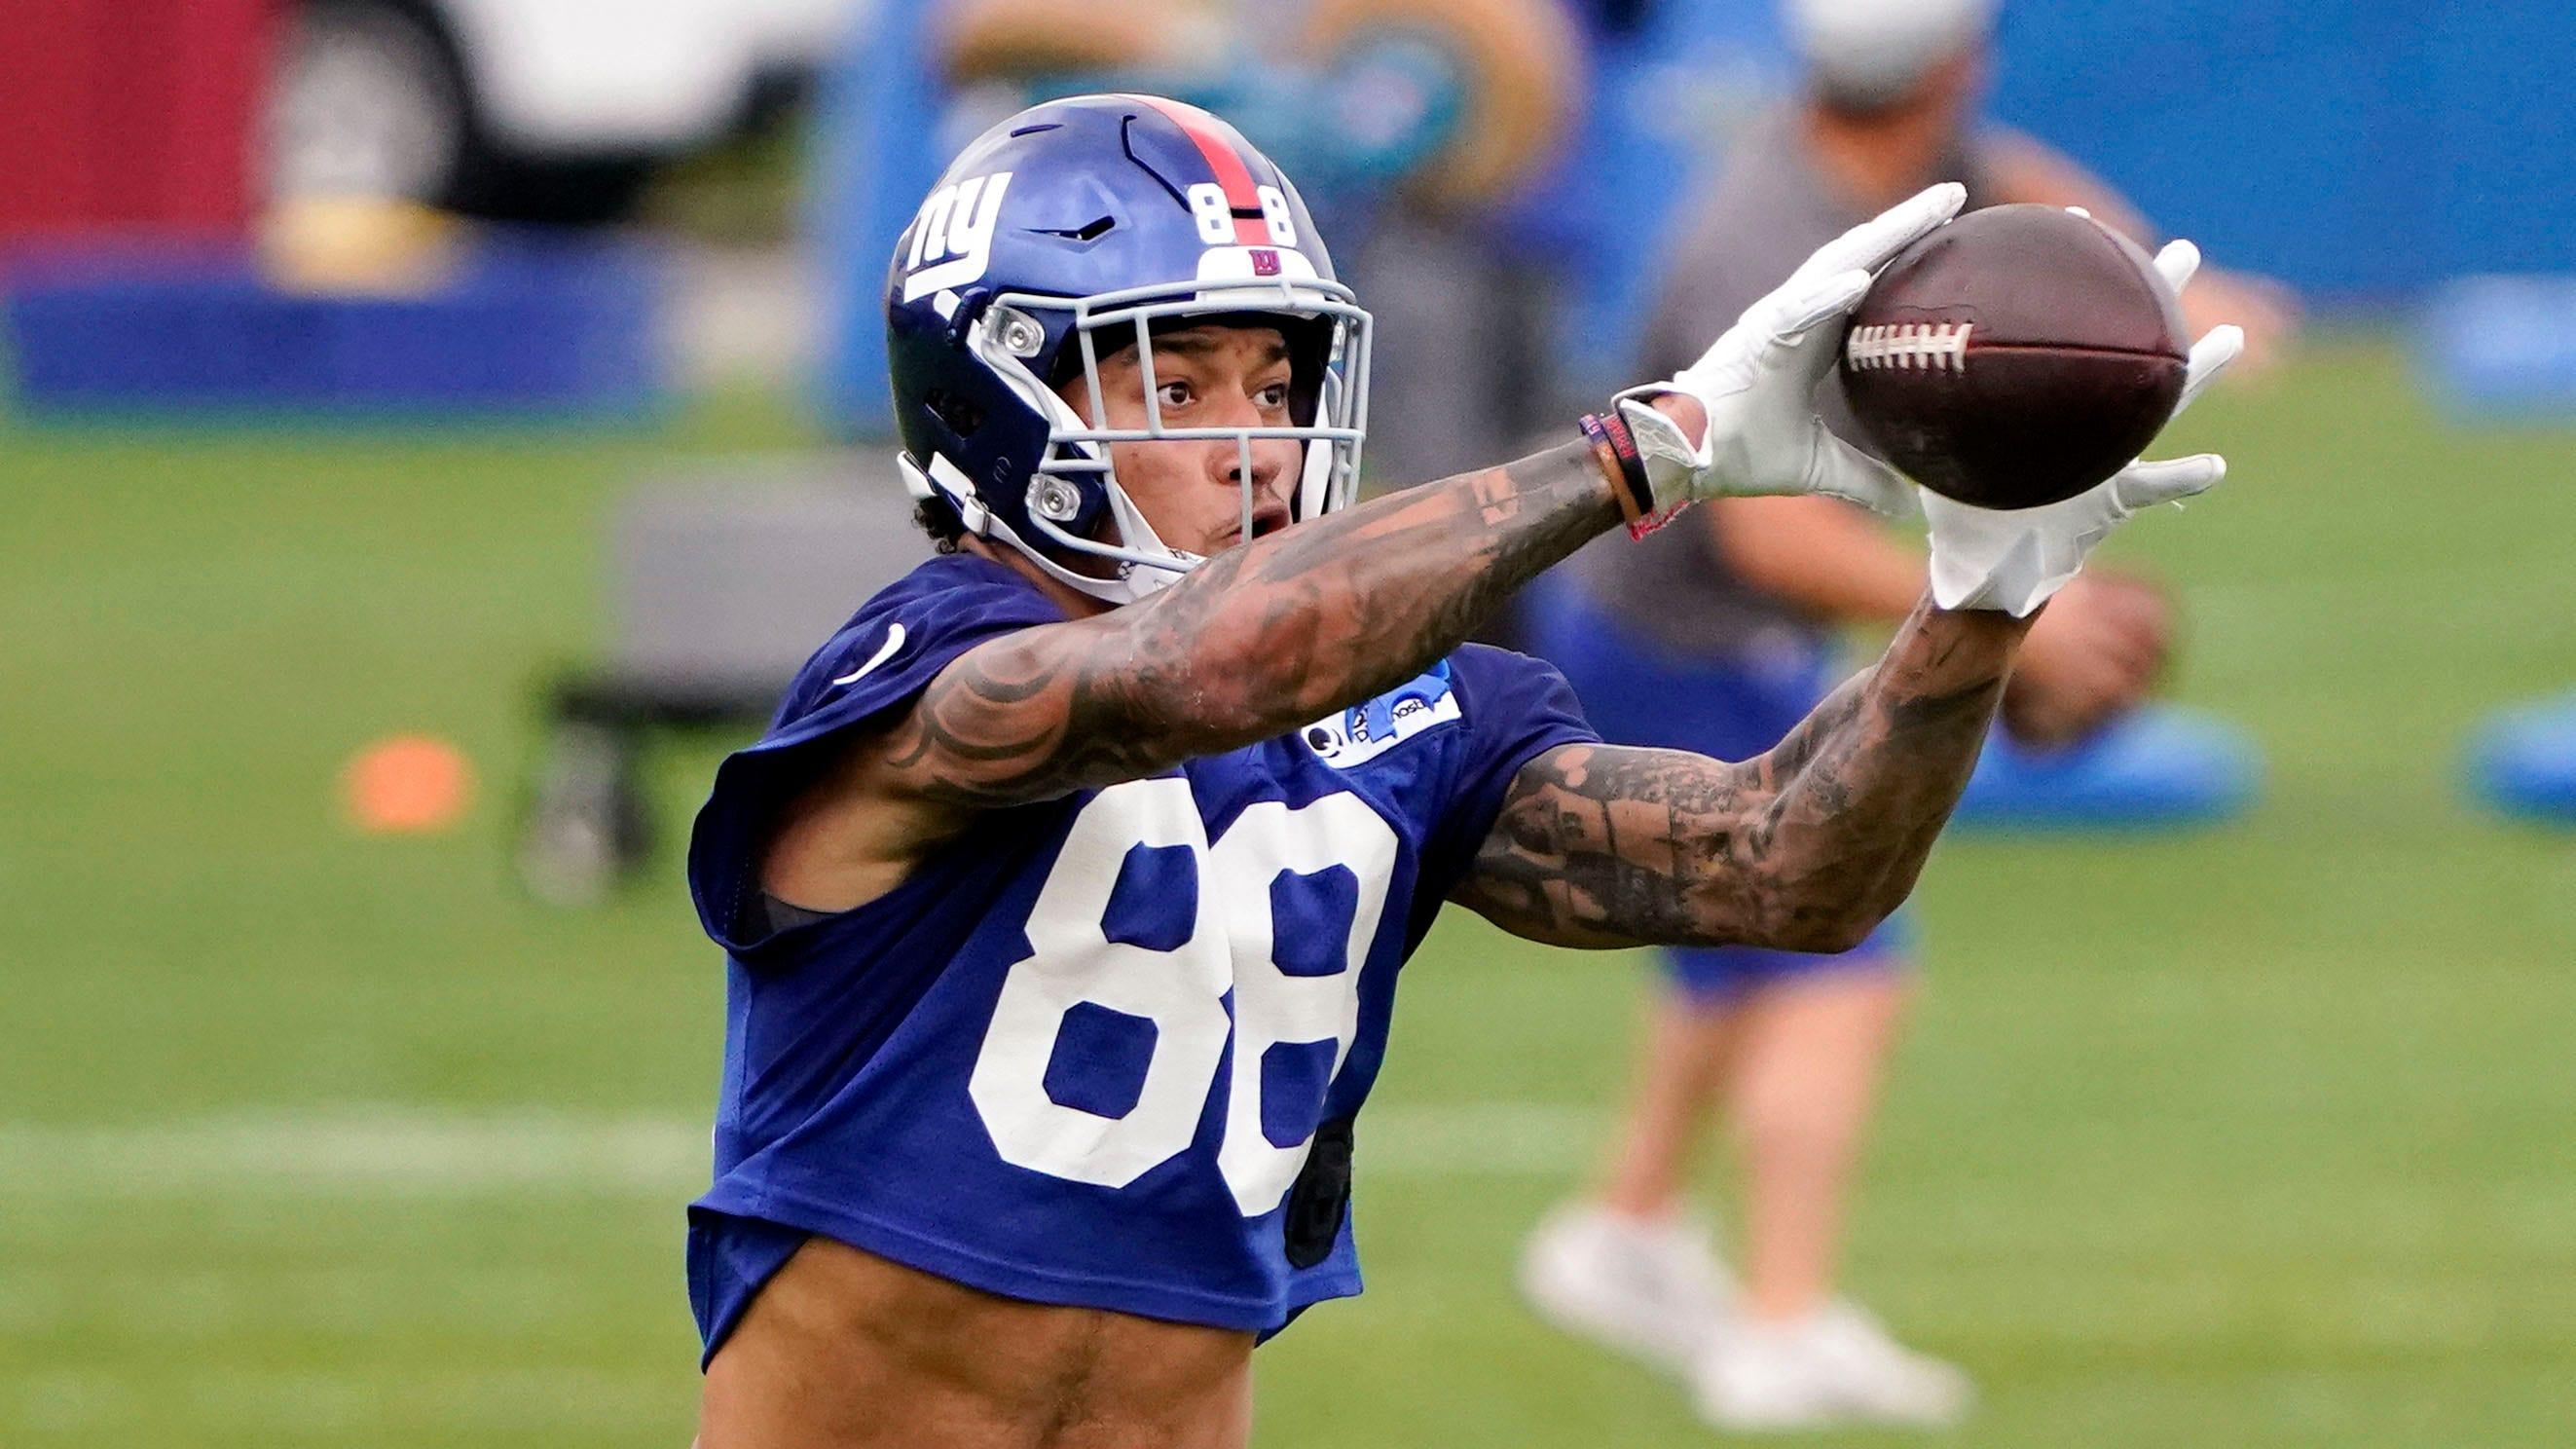 New York Giants tight end Evan Engram (88) catches the ball during OTA practice at the Quest Diagnostics Training Center on Friday, June 4, 2021, in East Rutherford. Giants Ota Practice / Danielle Parhizkaran/NorthJersey.com-Imagn Content Services, LLC